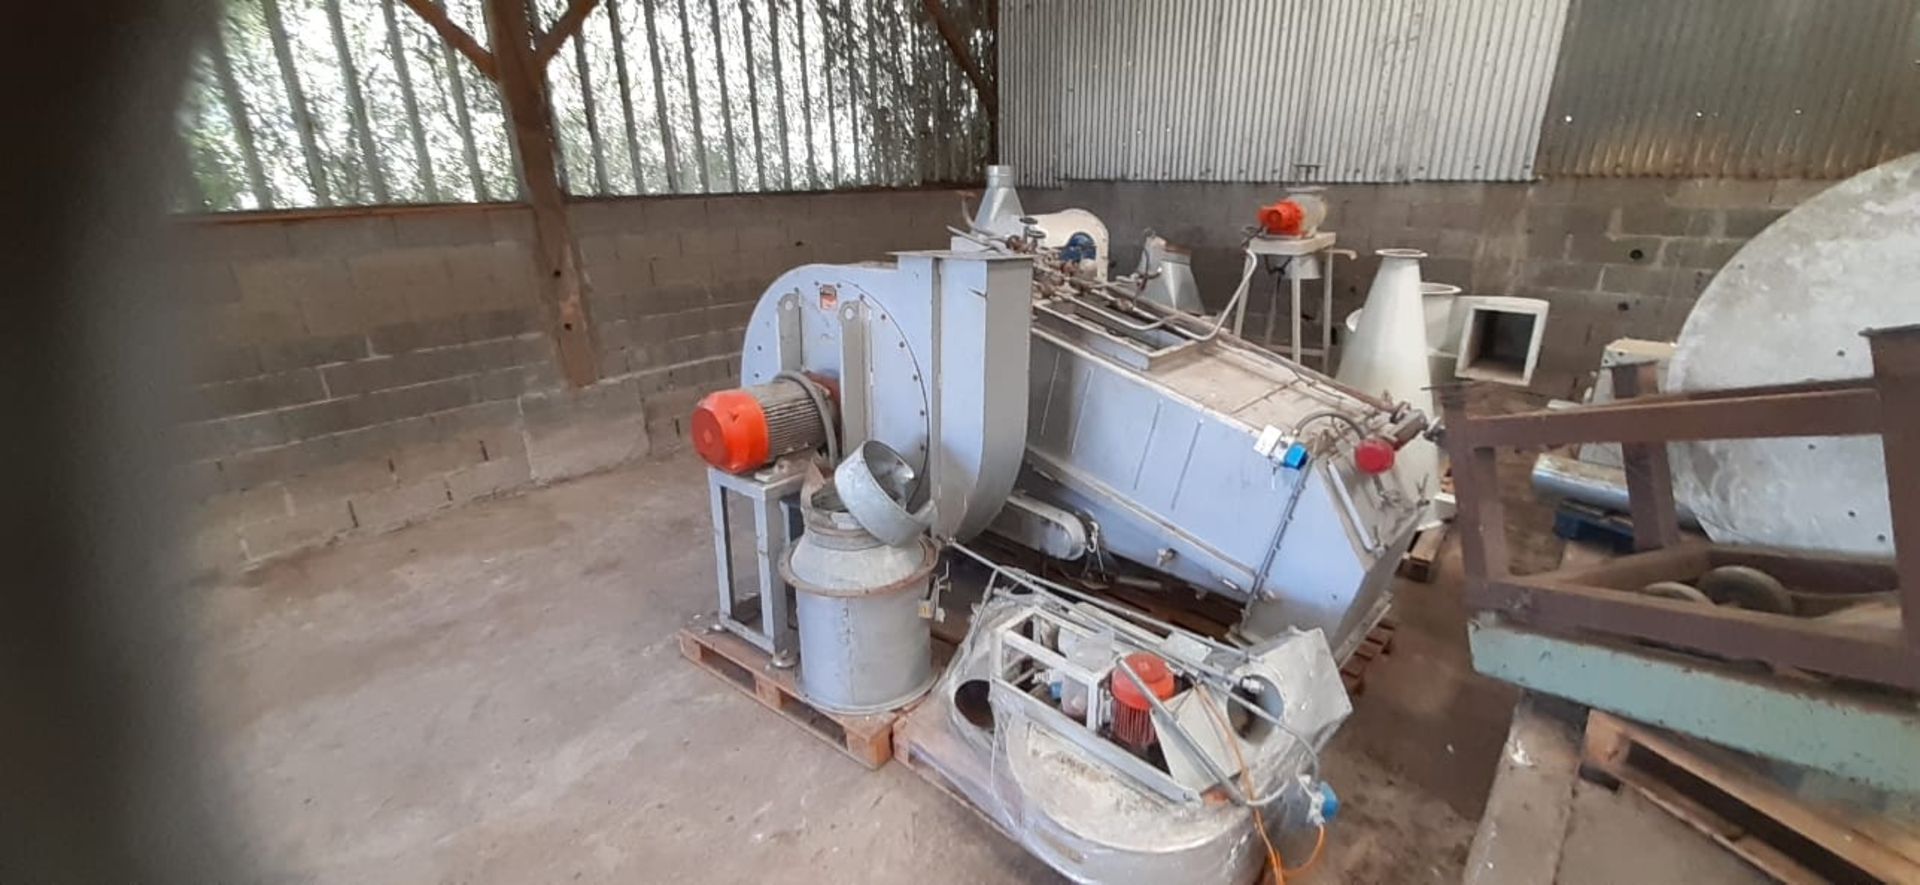 Bed Dryer - Buhler OTW 150 fluid bed dryer/cooler, new 1998 but never used. It can be used to dry or - Bild 4 aus 11